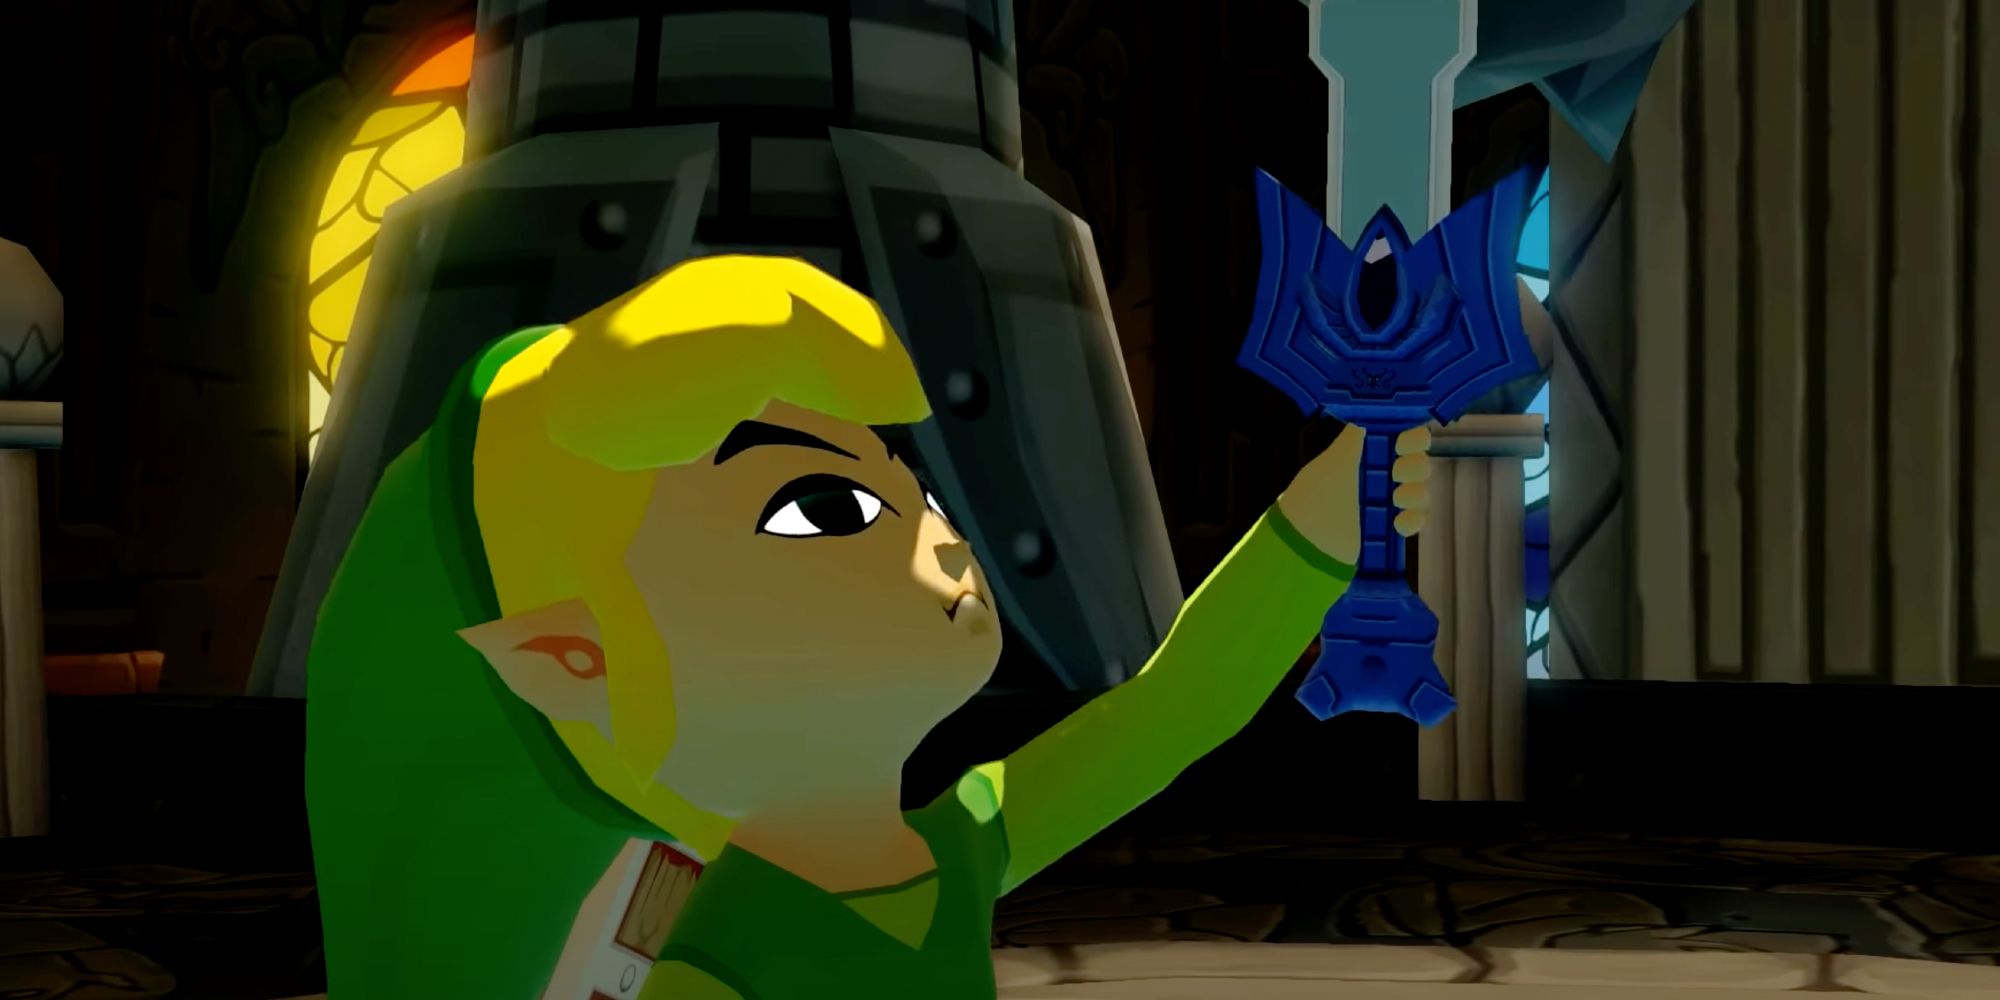 Link lifts The Master Sword in The Wind Waker.